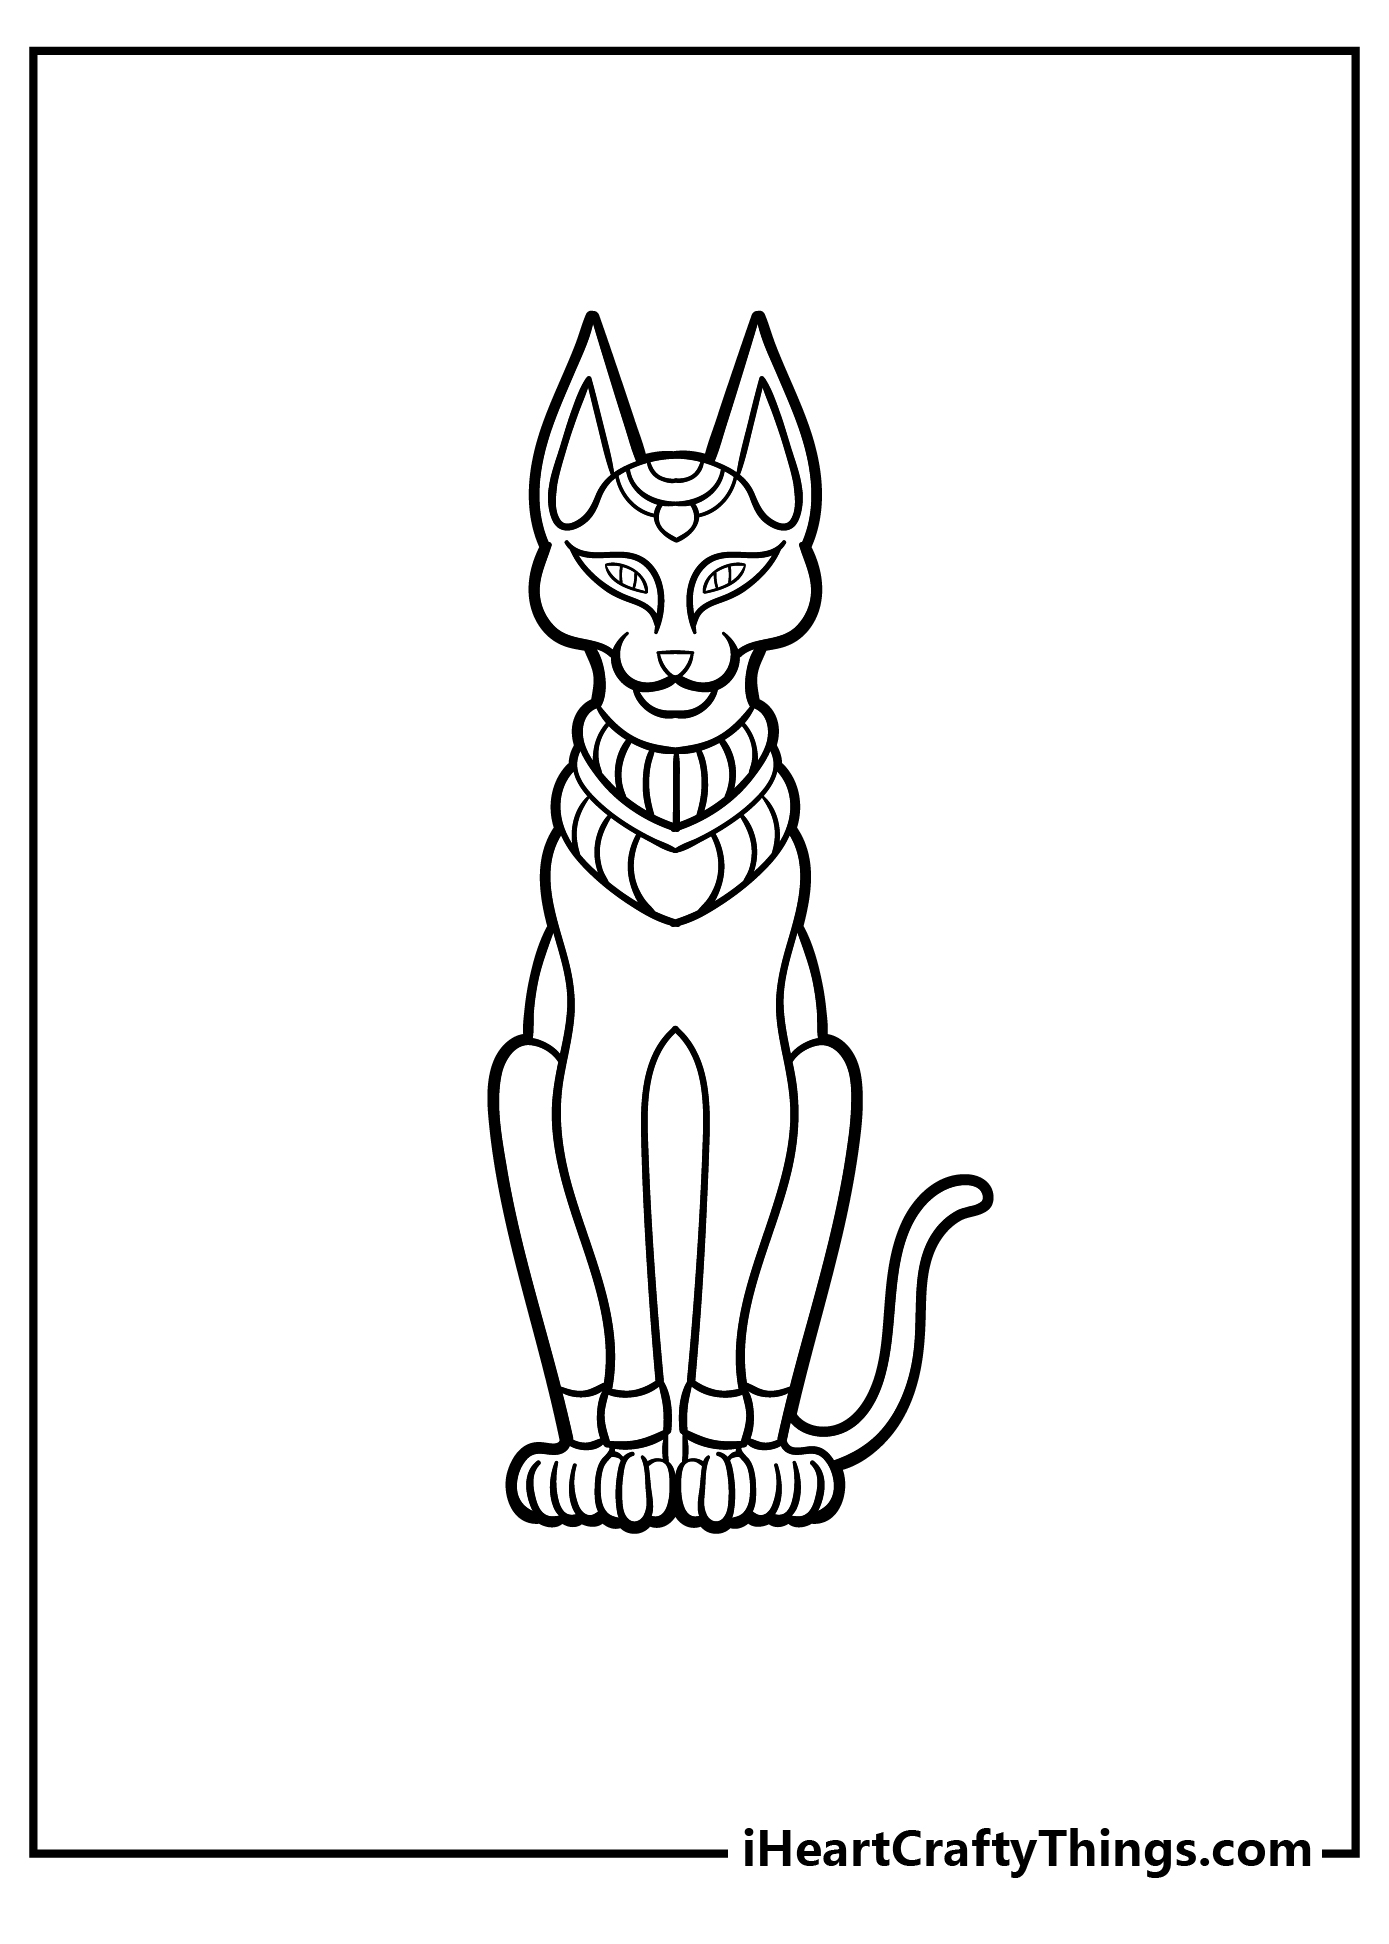 Egyptian Coloring Pages for kids free download